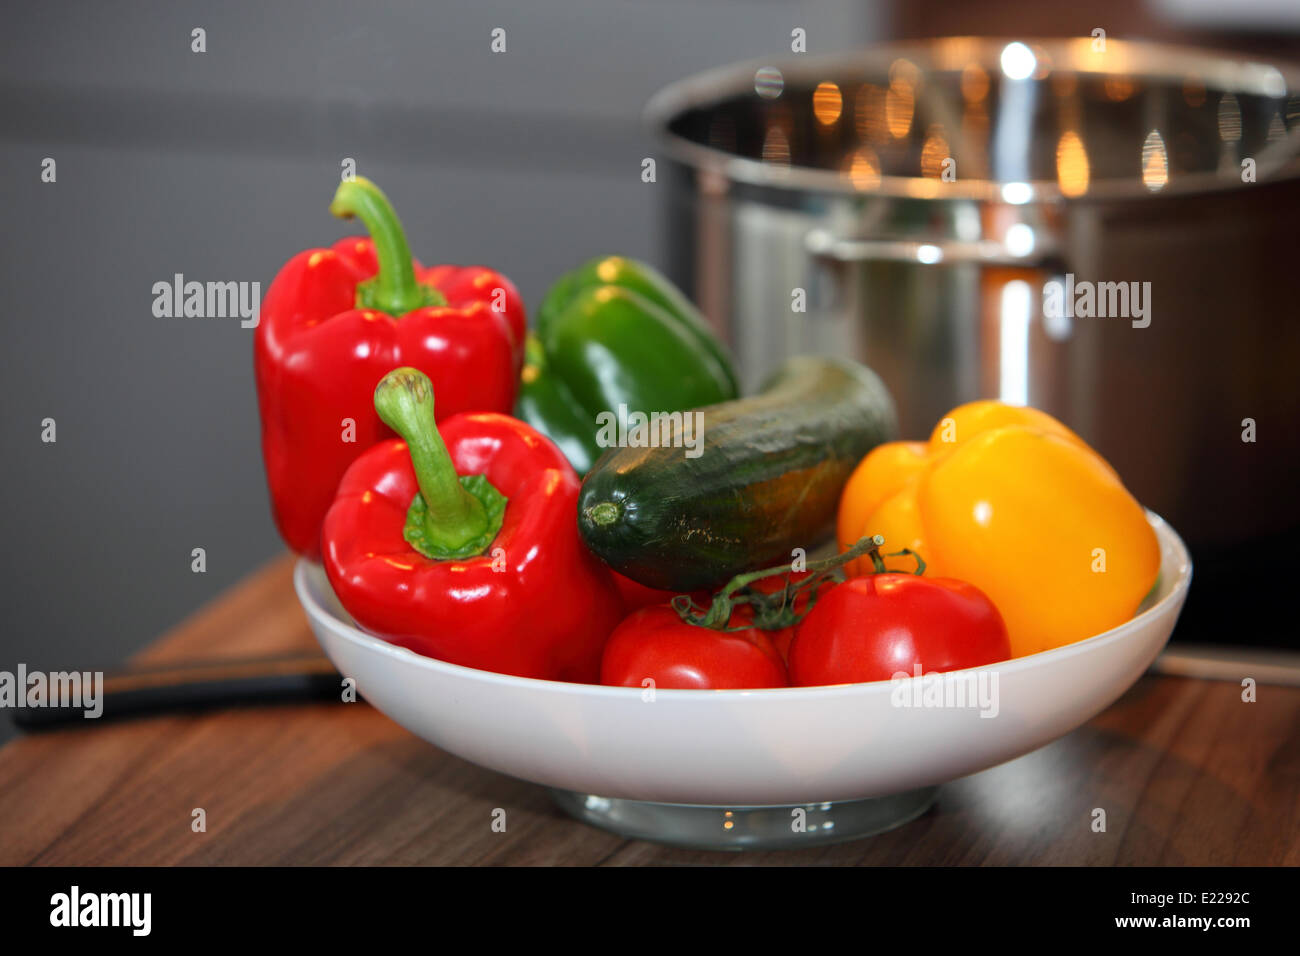 Brightly coloured bowl of vegetables Stock Photo